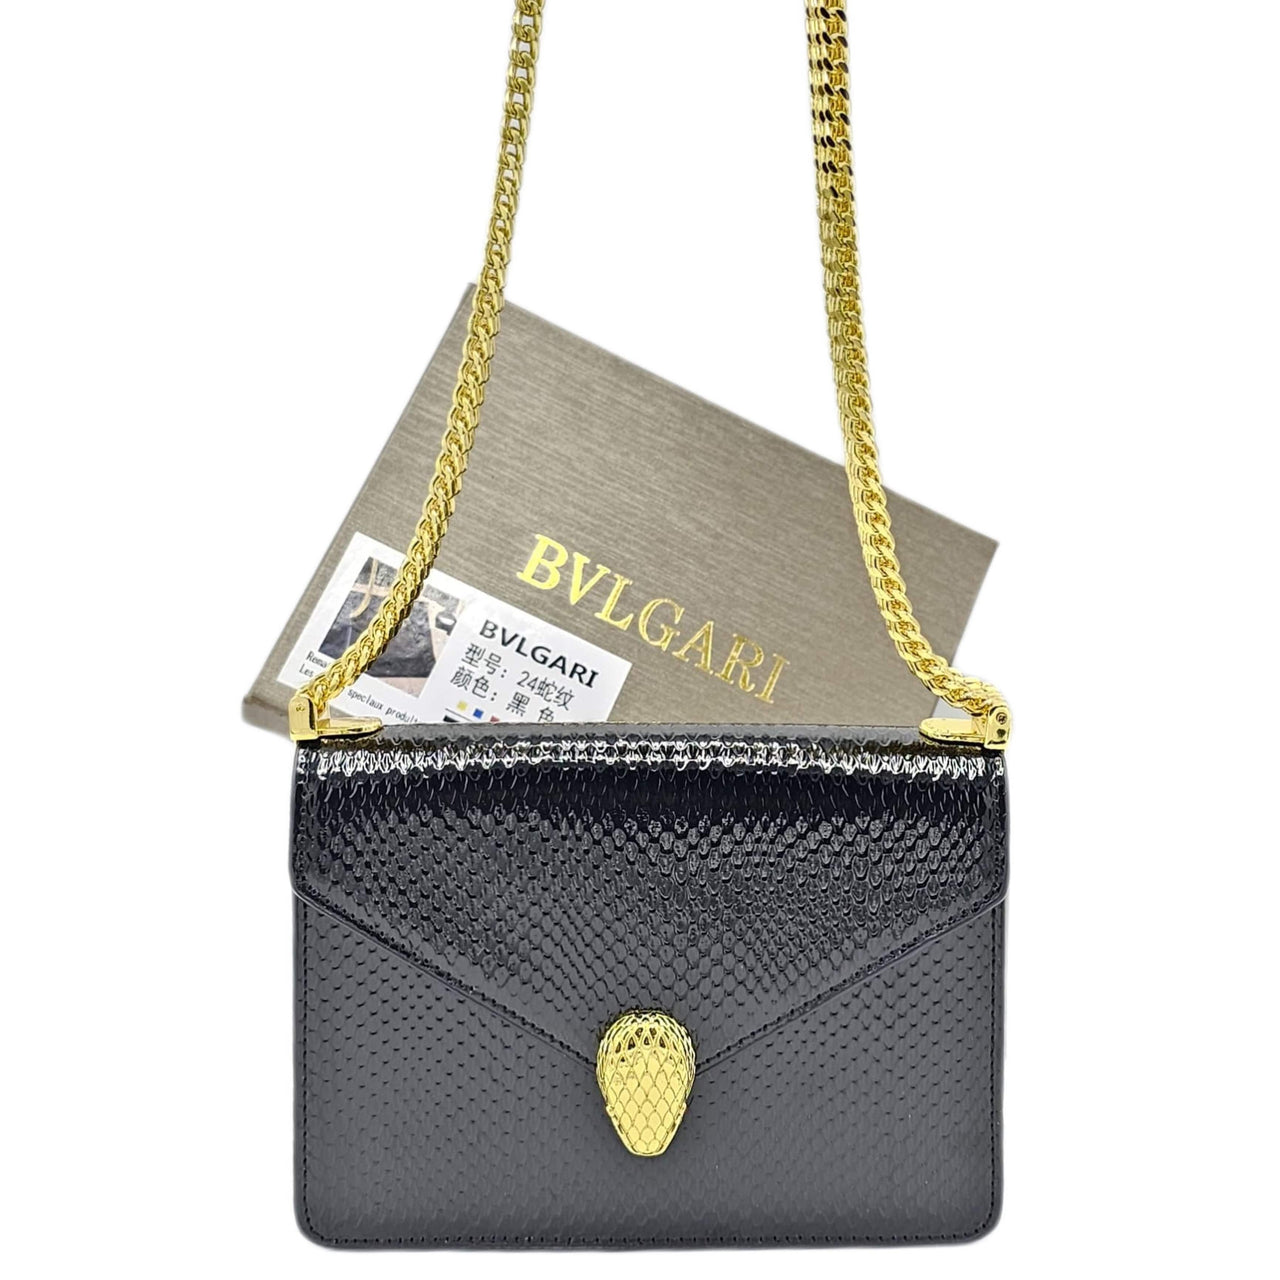 The Bag Couture Handbags, Wallets & Cases BVLGARI Serpenti Forever Small Shoulder Bag Black